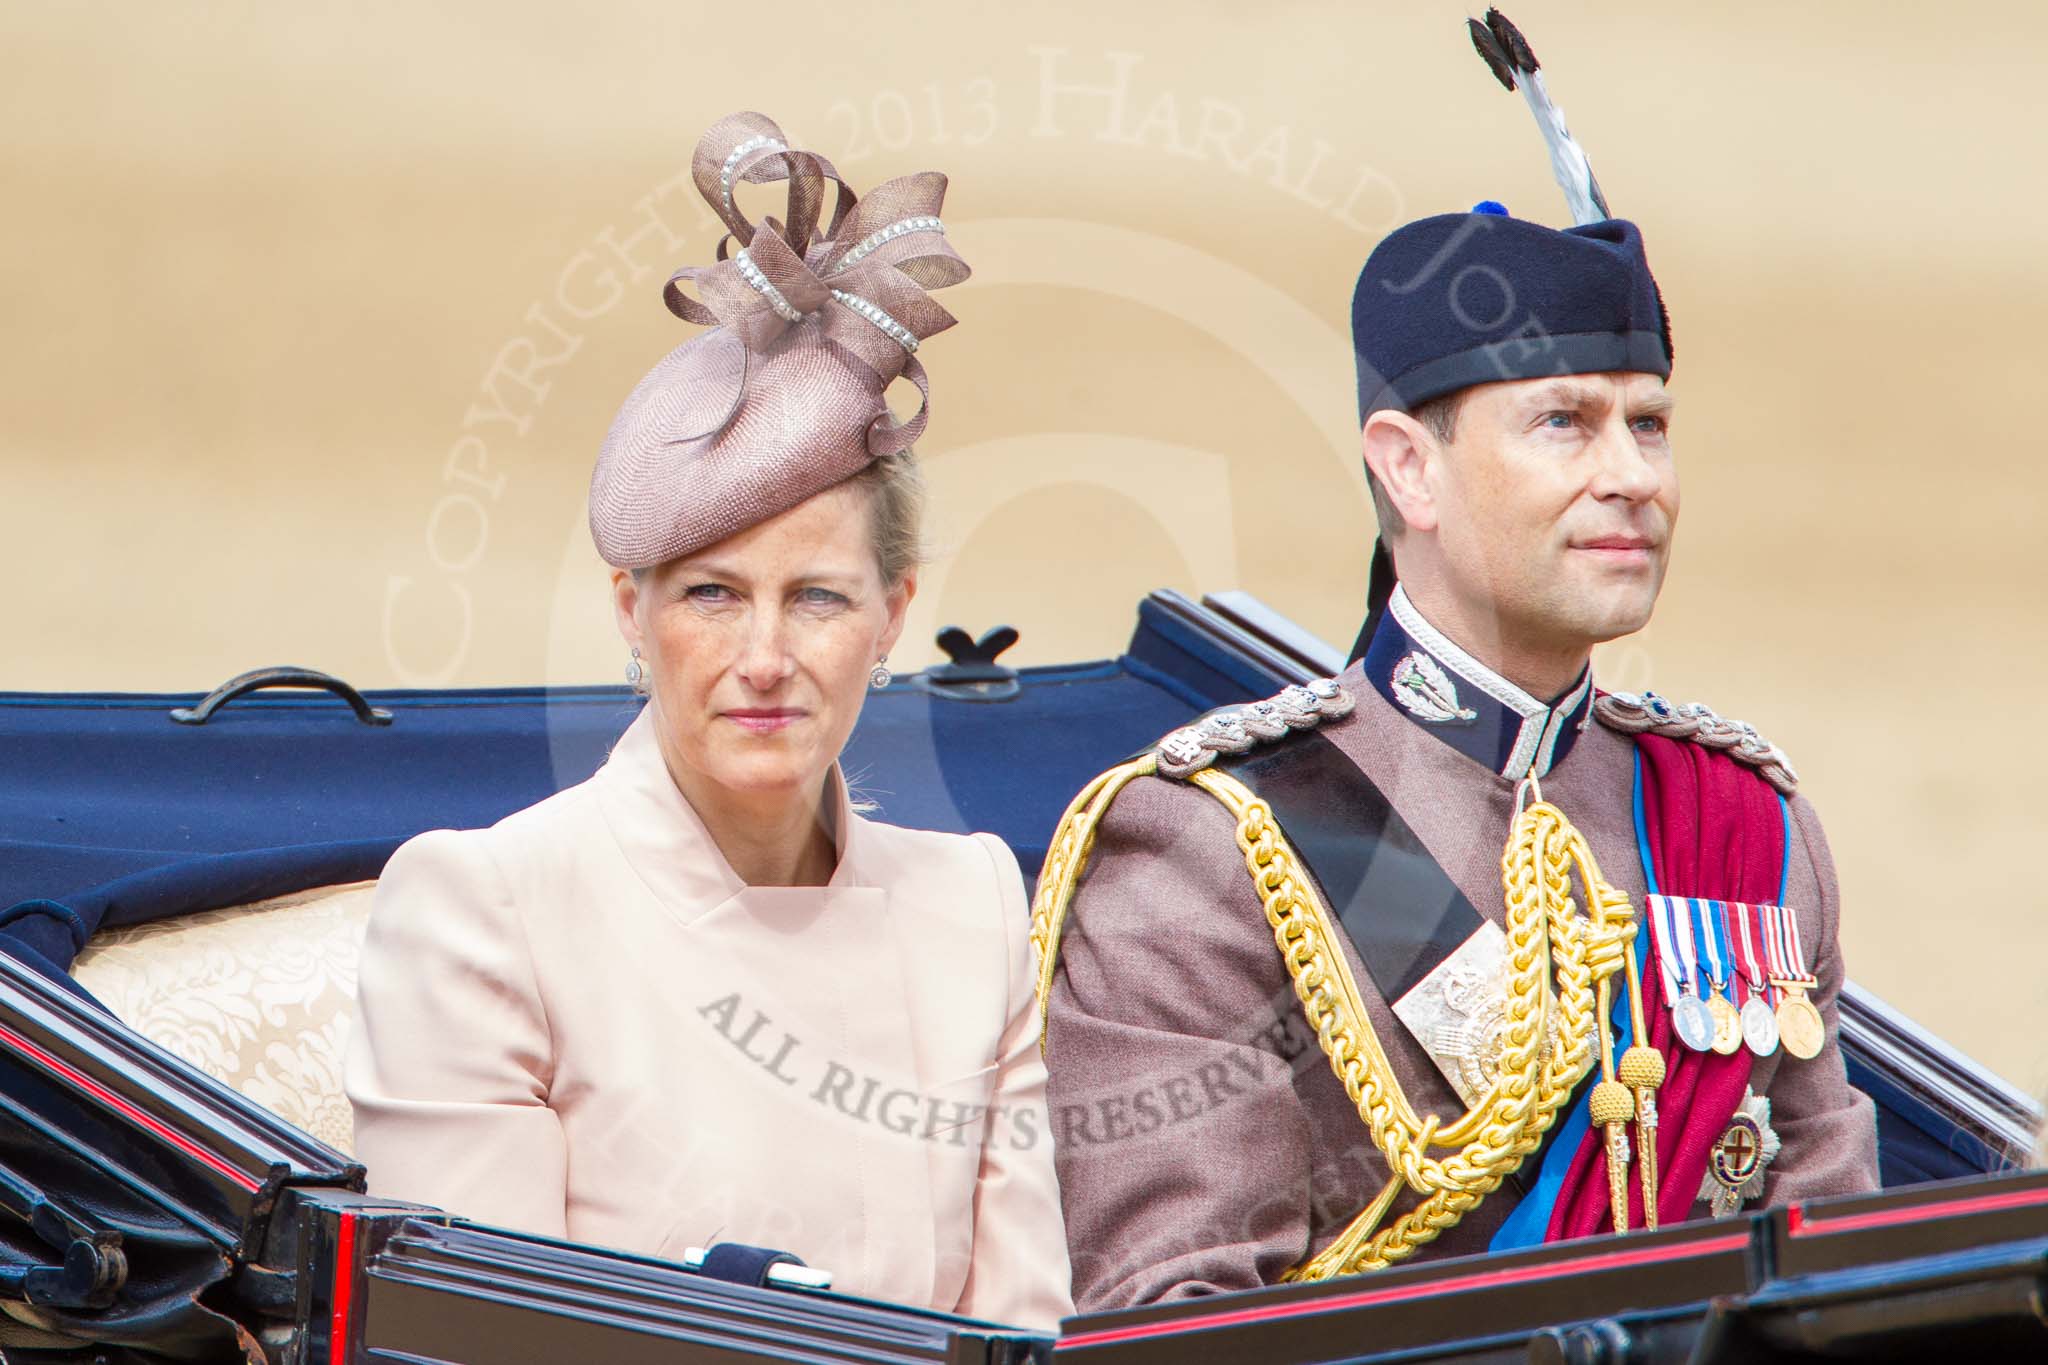 Trooping the Colour 2013: HRH The Countess of Wessex and HRH The Earl of Wessex in the third barouche carriage on the way across Horse Guards Parade to watch the parade from the Major General's office..
Horse Guards Parade, Westminster,
London SW1,

United Kingdom,
on 15 June 2013 at 10:50, image #213